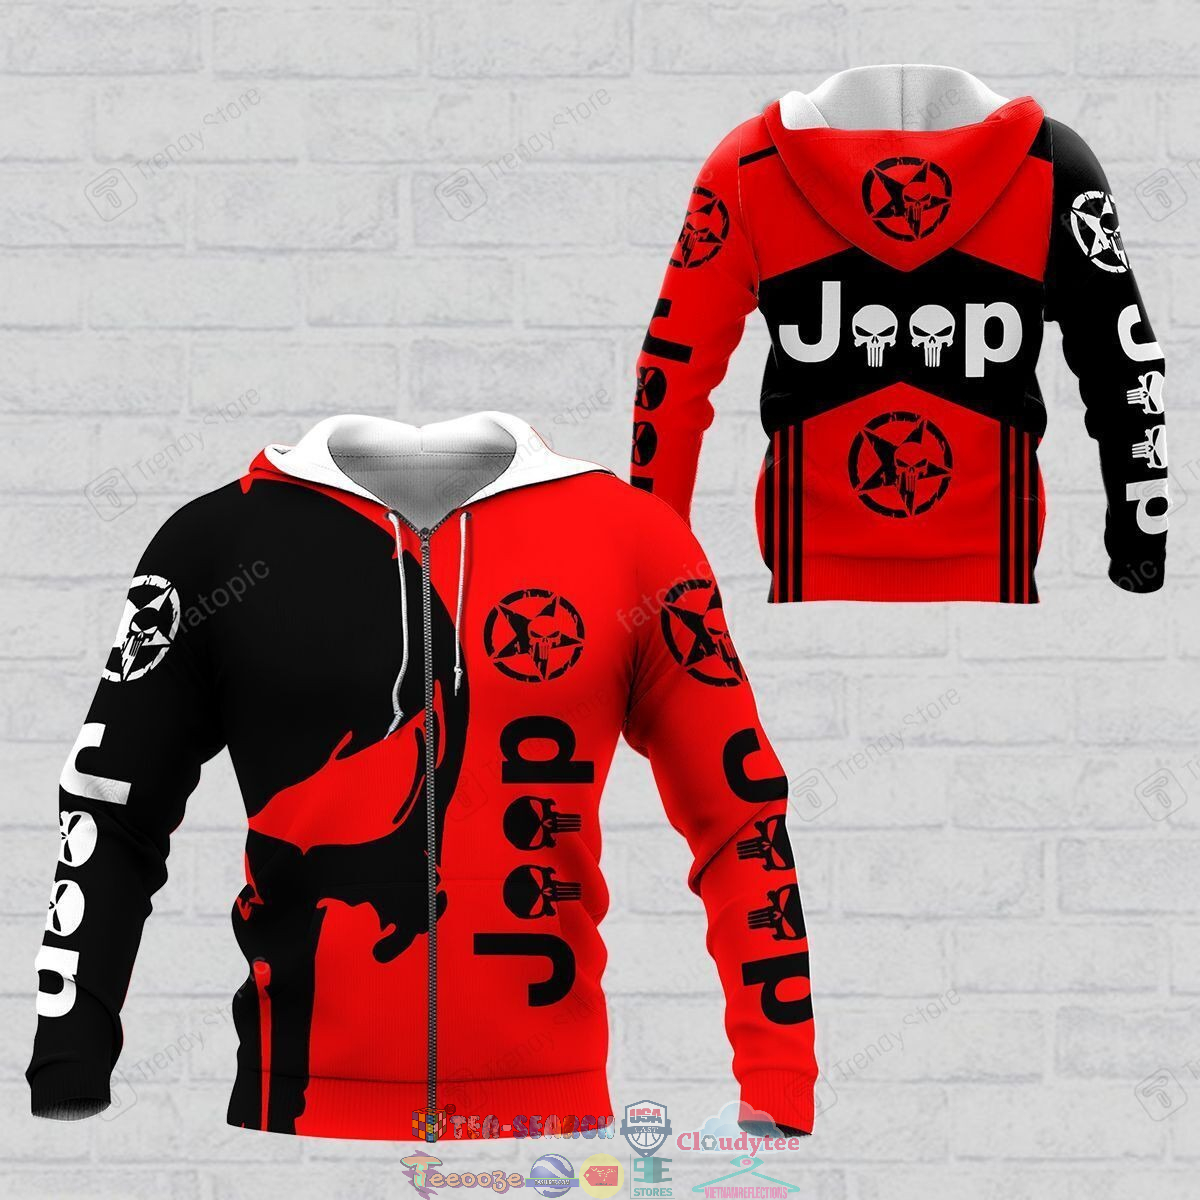 Jeep Skull Star 3D hoodie and t-shirt